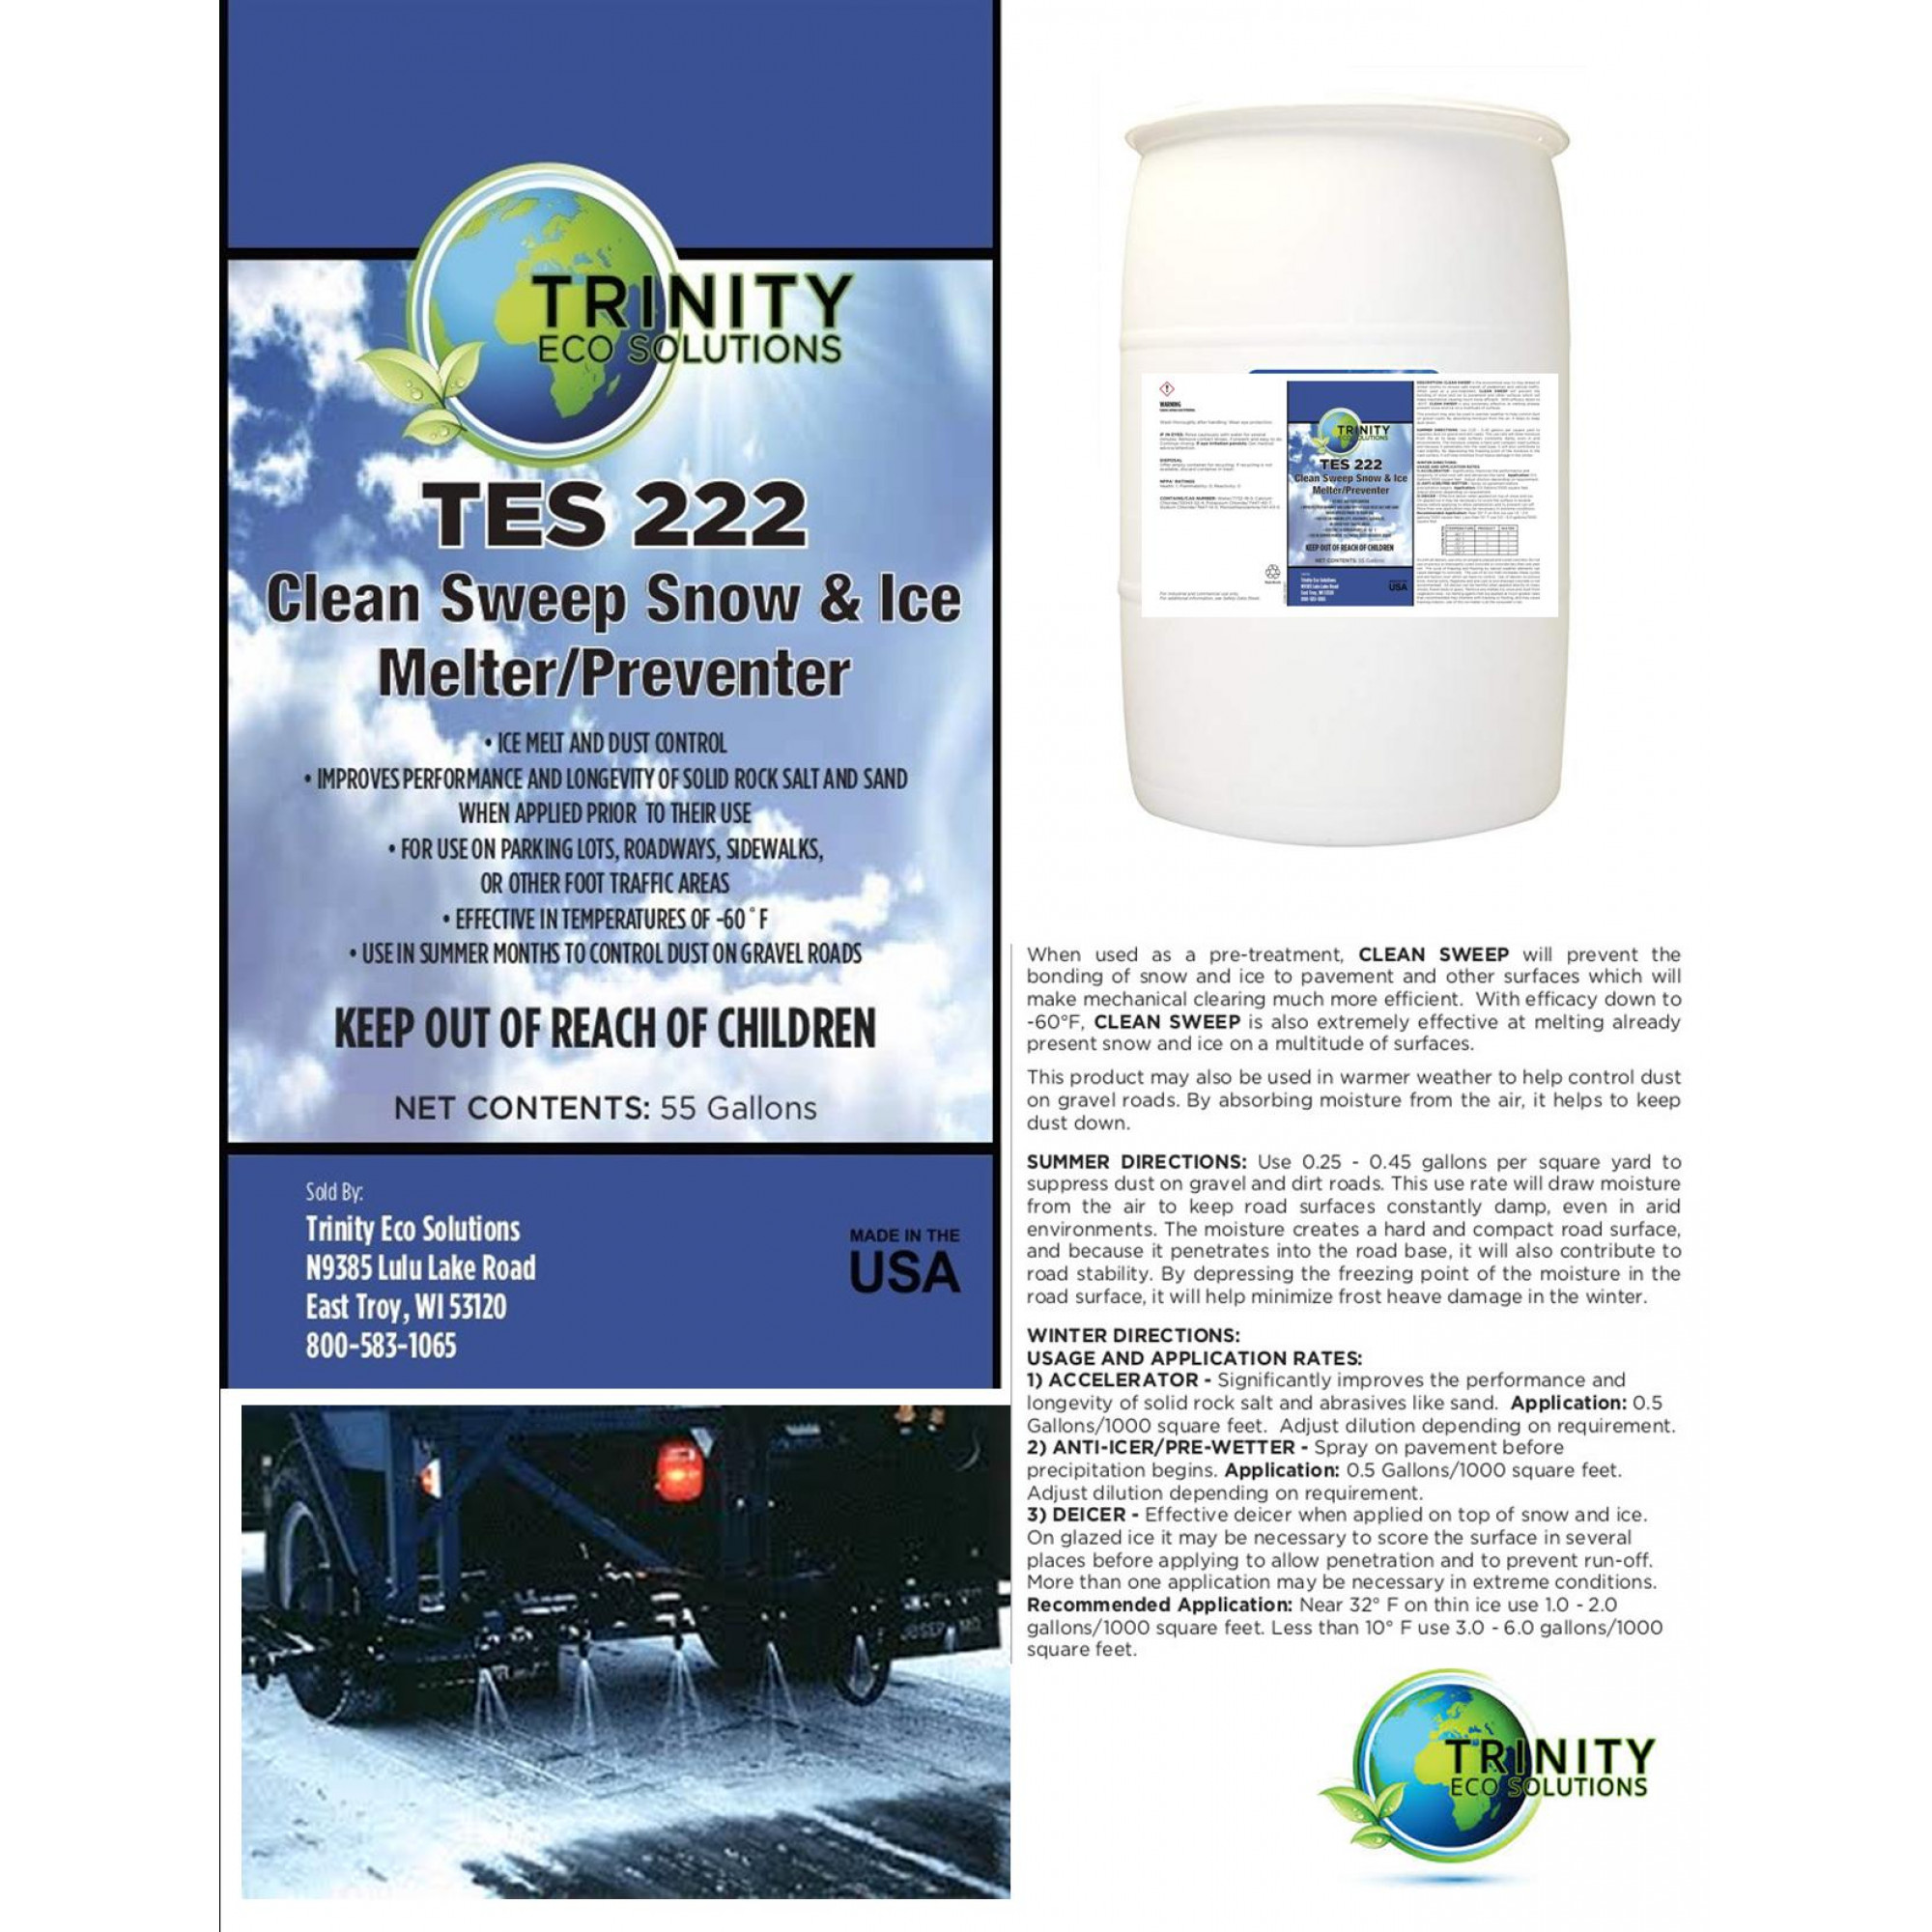 TES 222 Clean Sweep Snow & Ice Remover